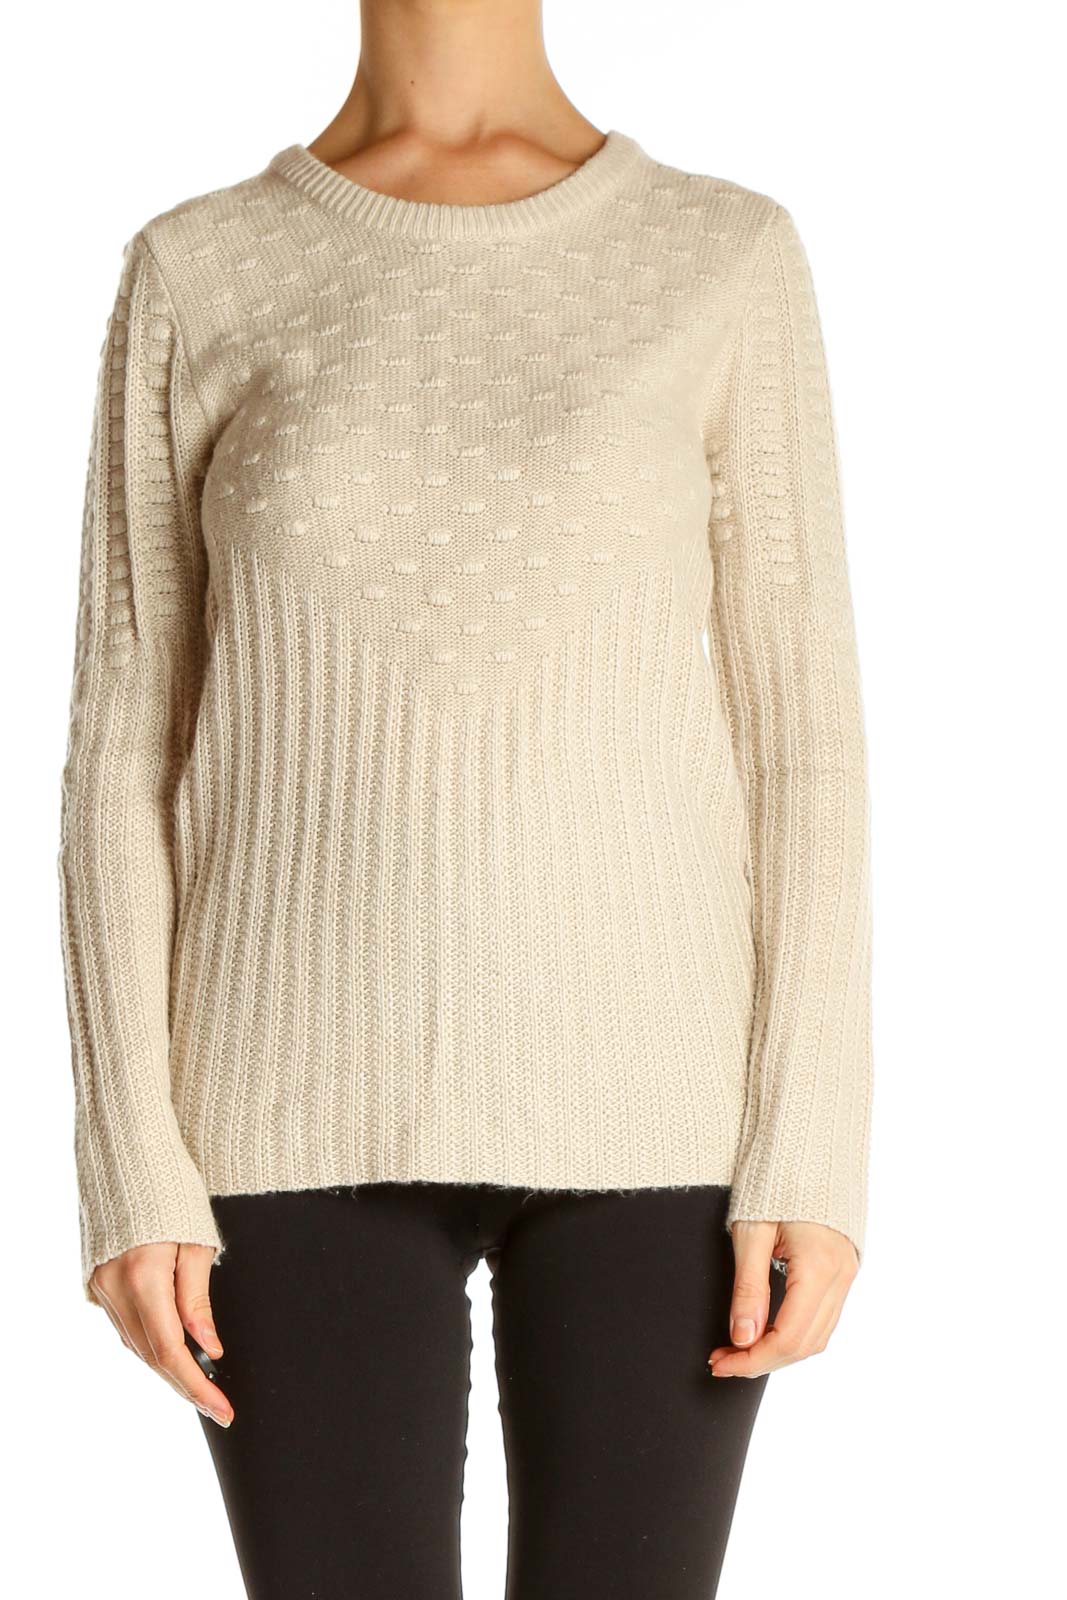 Beige Textured Classic Sweater Front